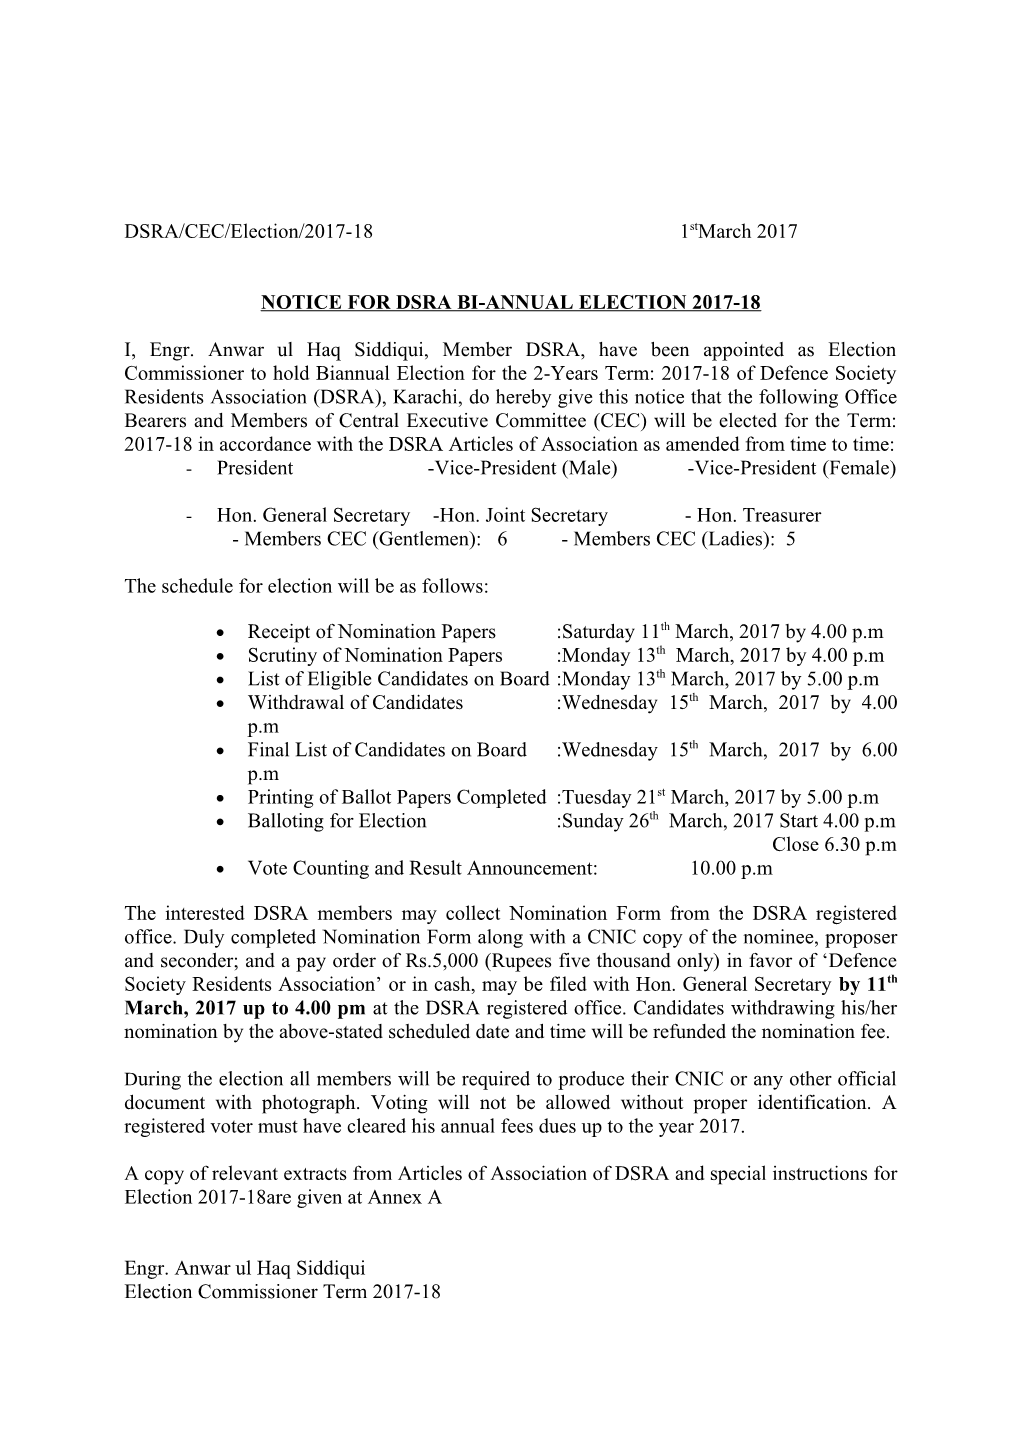 Notice for Dsra Bi-Annual Election 2017-18